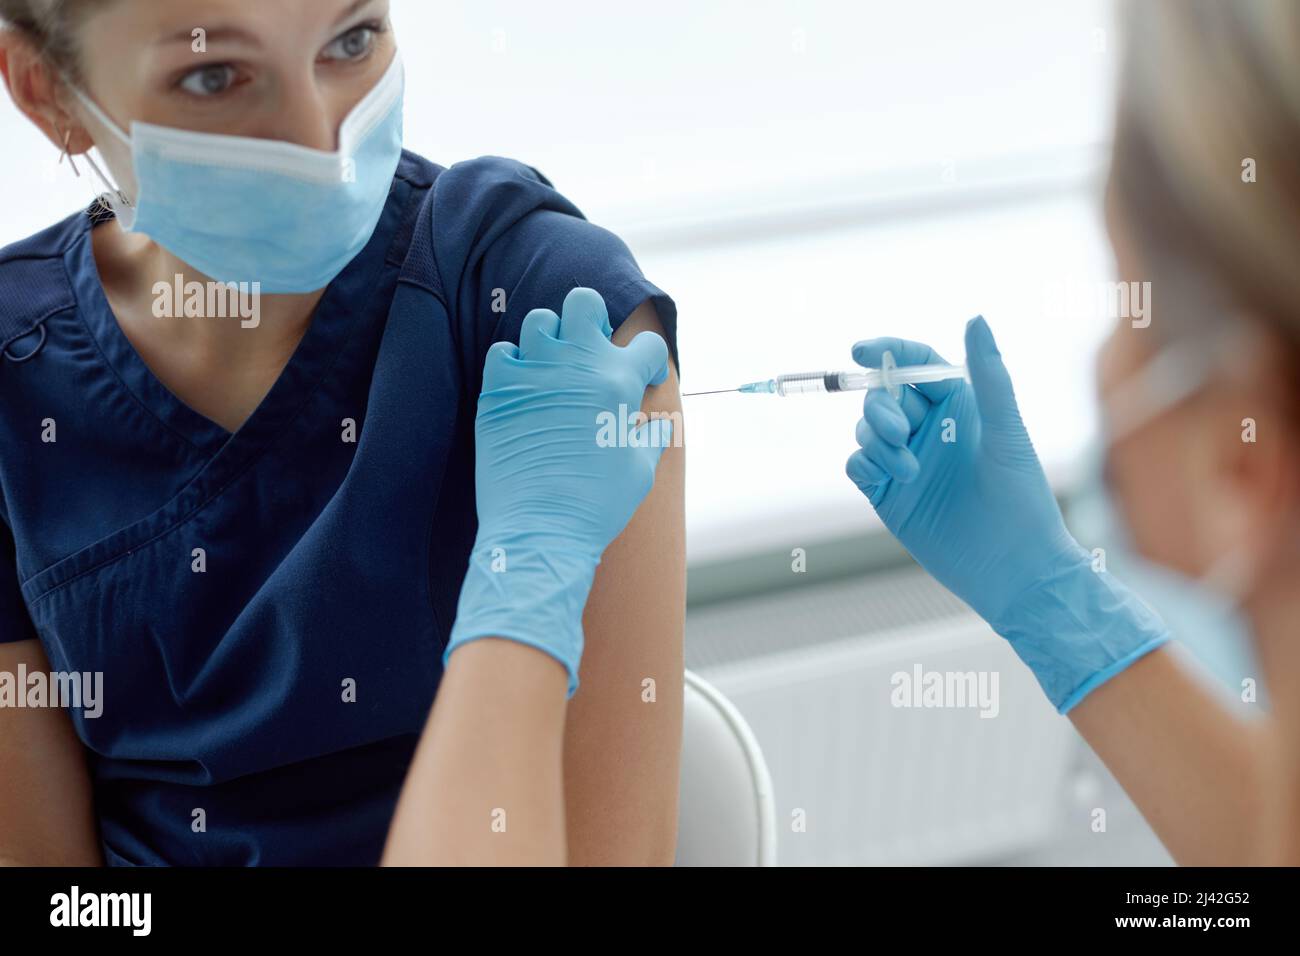 wonan doctor or nurse giving shot or vaccine to patient shoulder. Vaccination and prevention against flu or virus pandemic. Covid-19 or coronavirus va Stock Photo